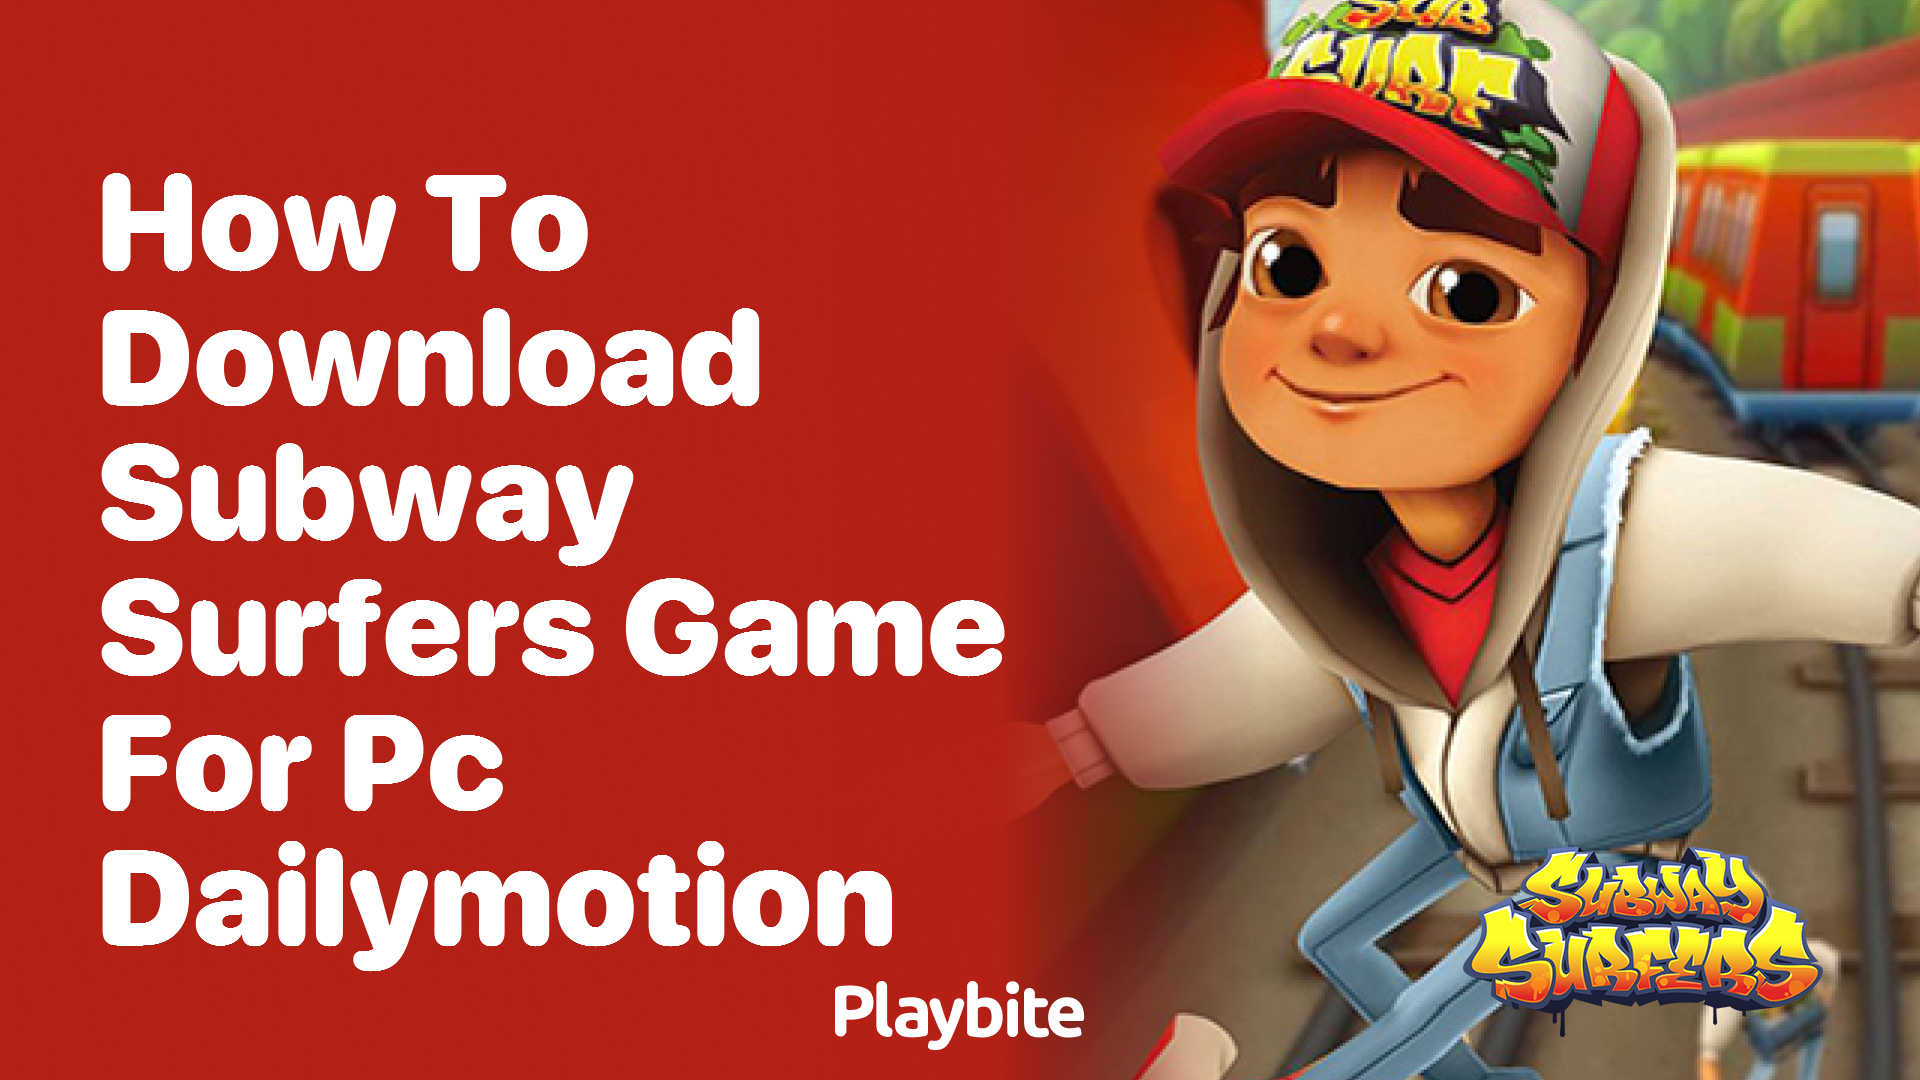 How to download Subway Surfers game for PC Dailymotion